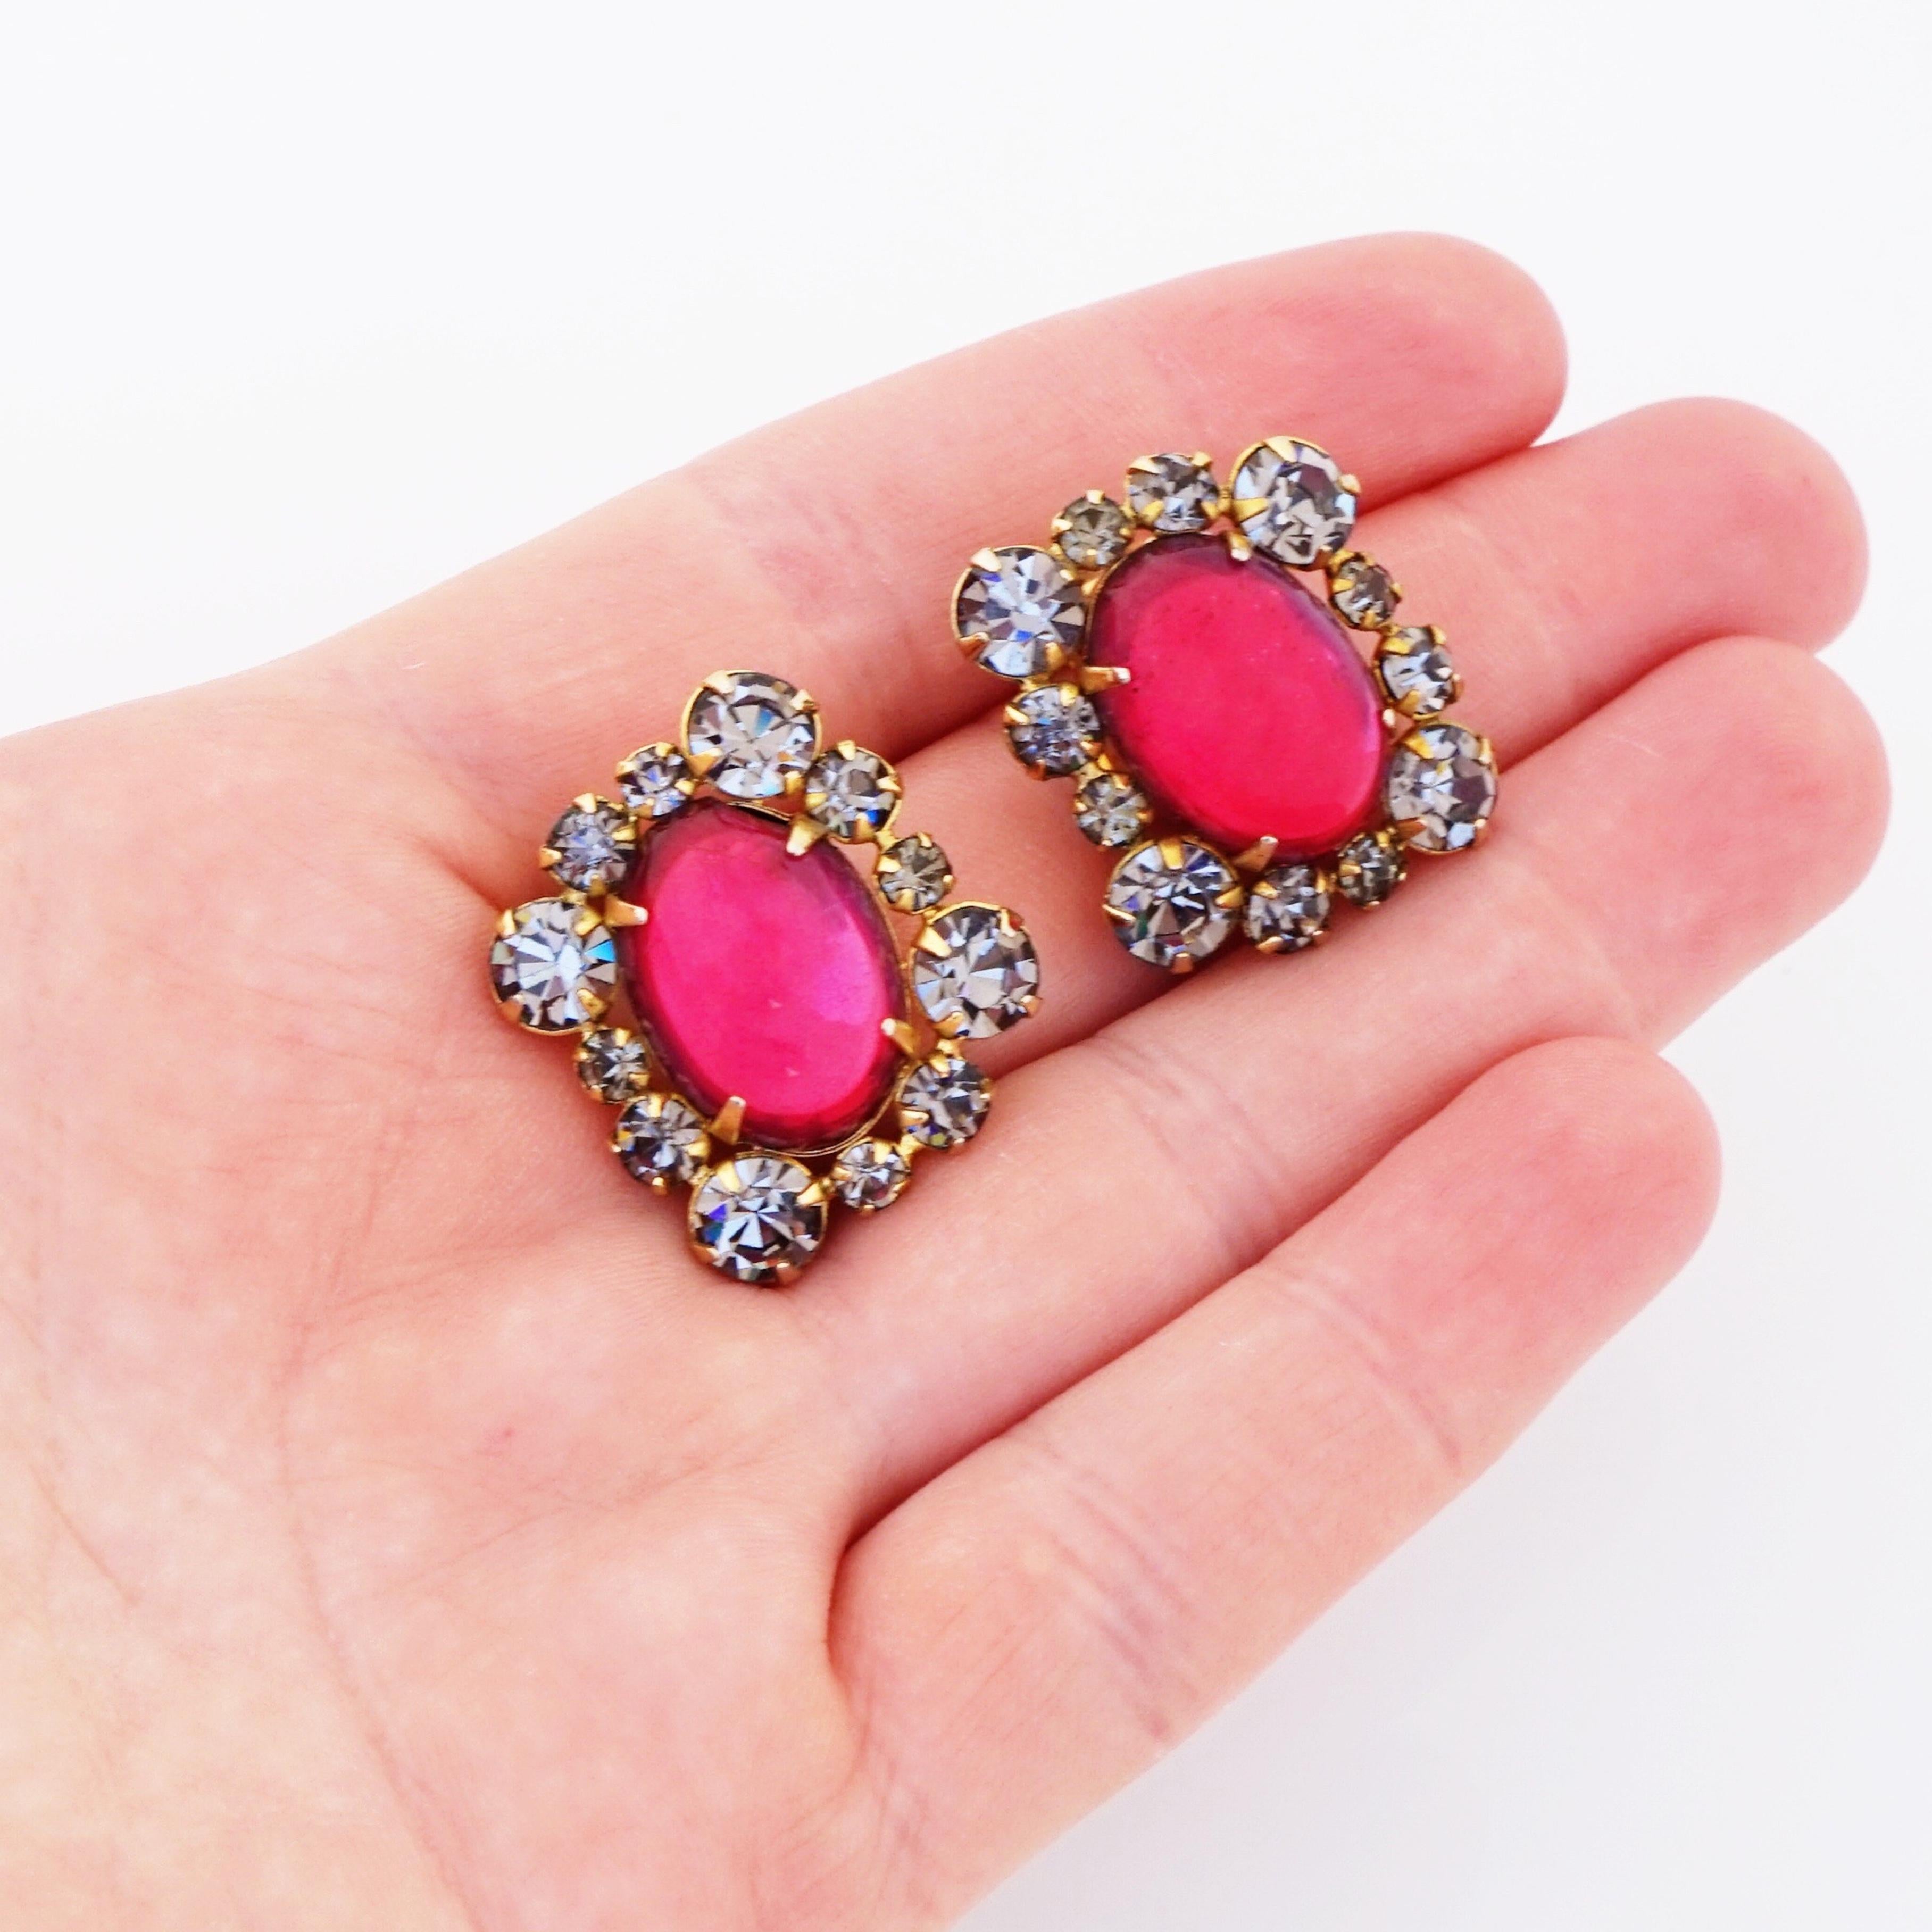 Red Gripoix Glass Earrings With Smokey Gray Rhinestones By Hattie Carnegie In Good Condition For Sale In McKinney, TX